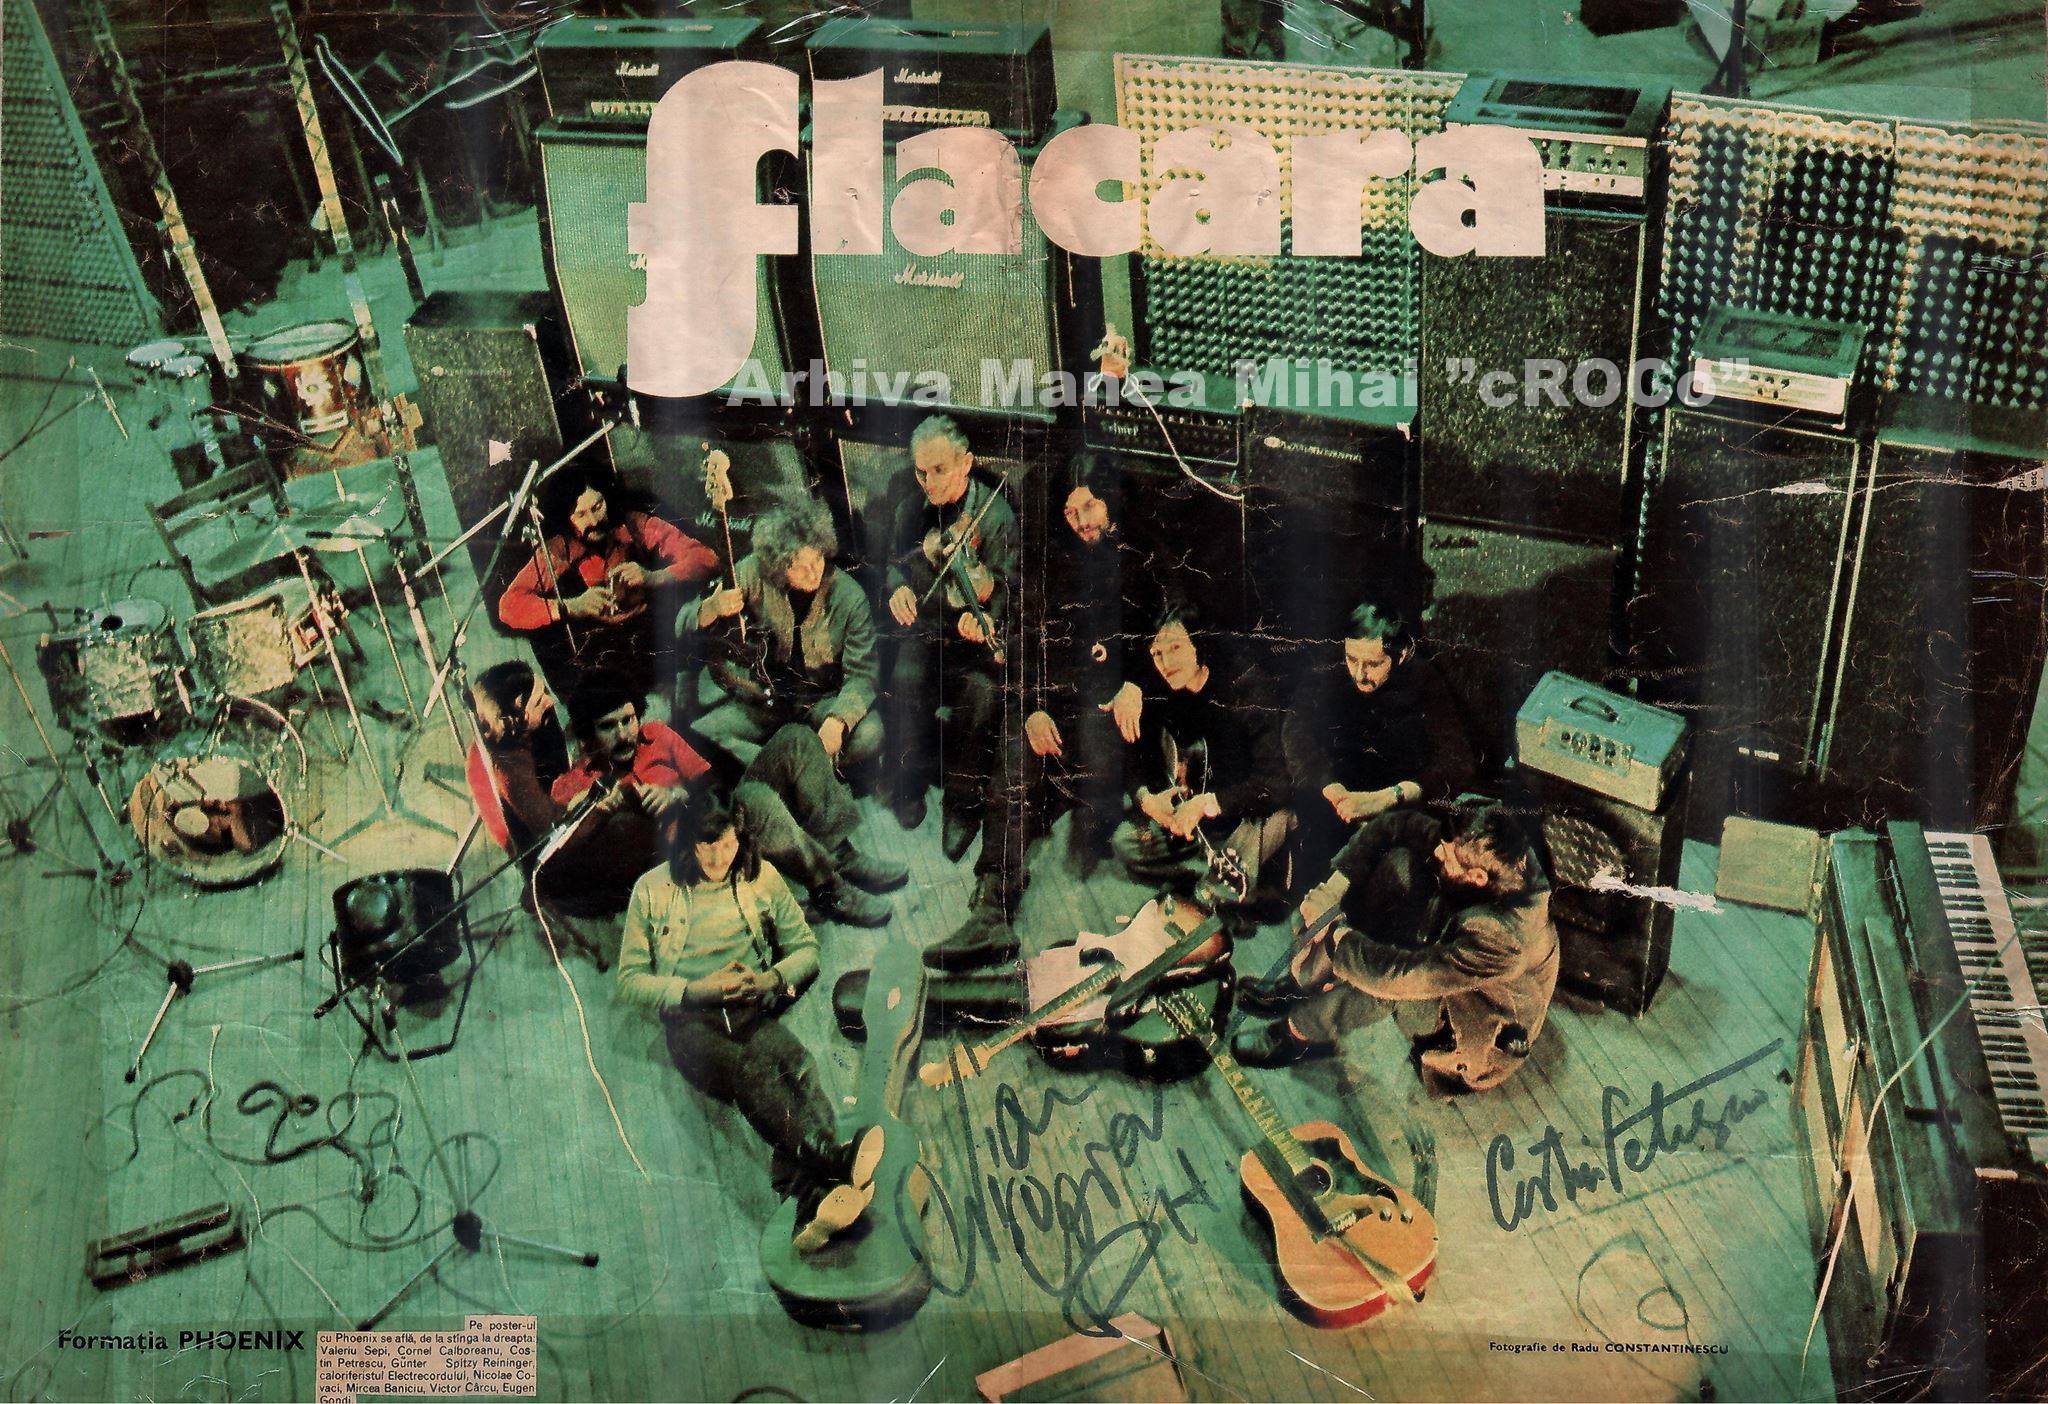 Poster with the Phoenix band in the Electrecord studio which included the autographs of its members